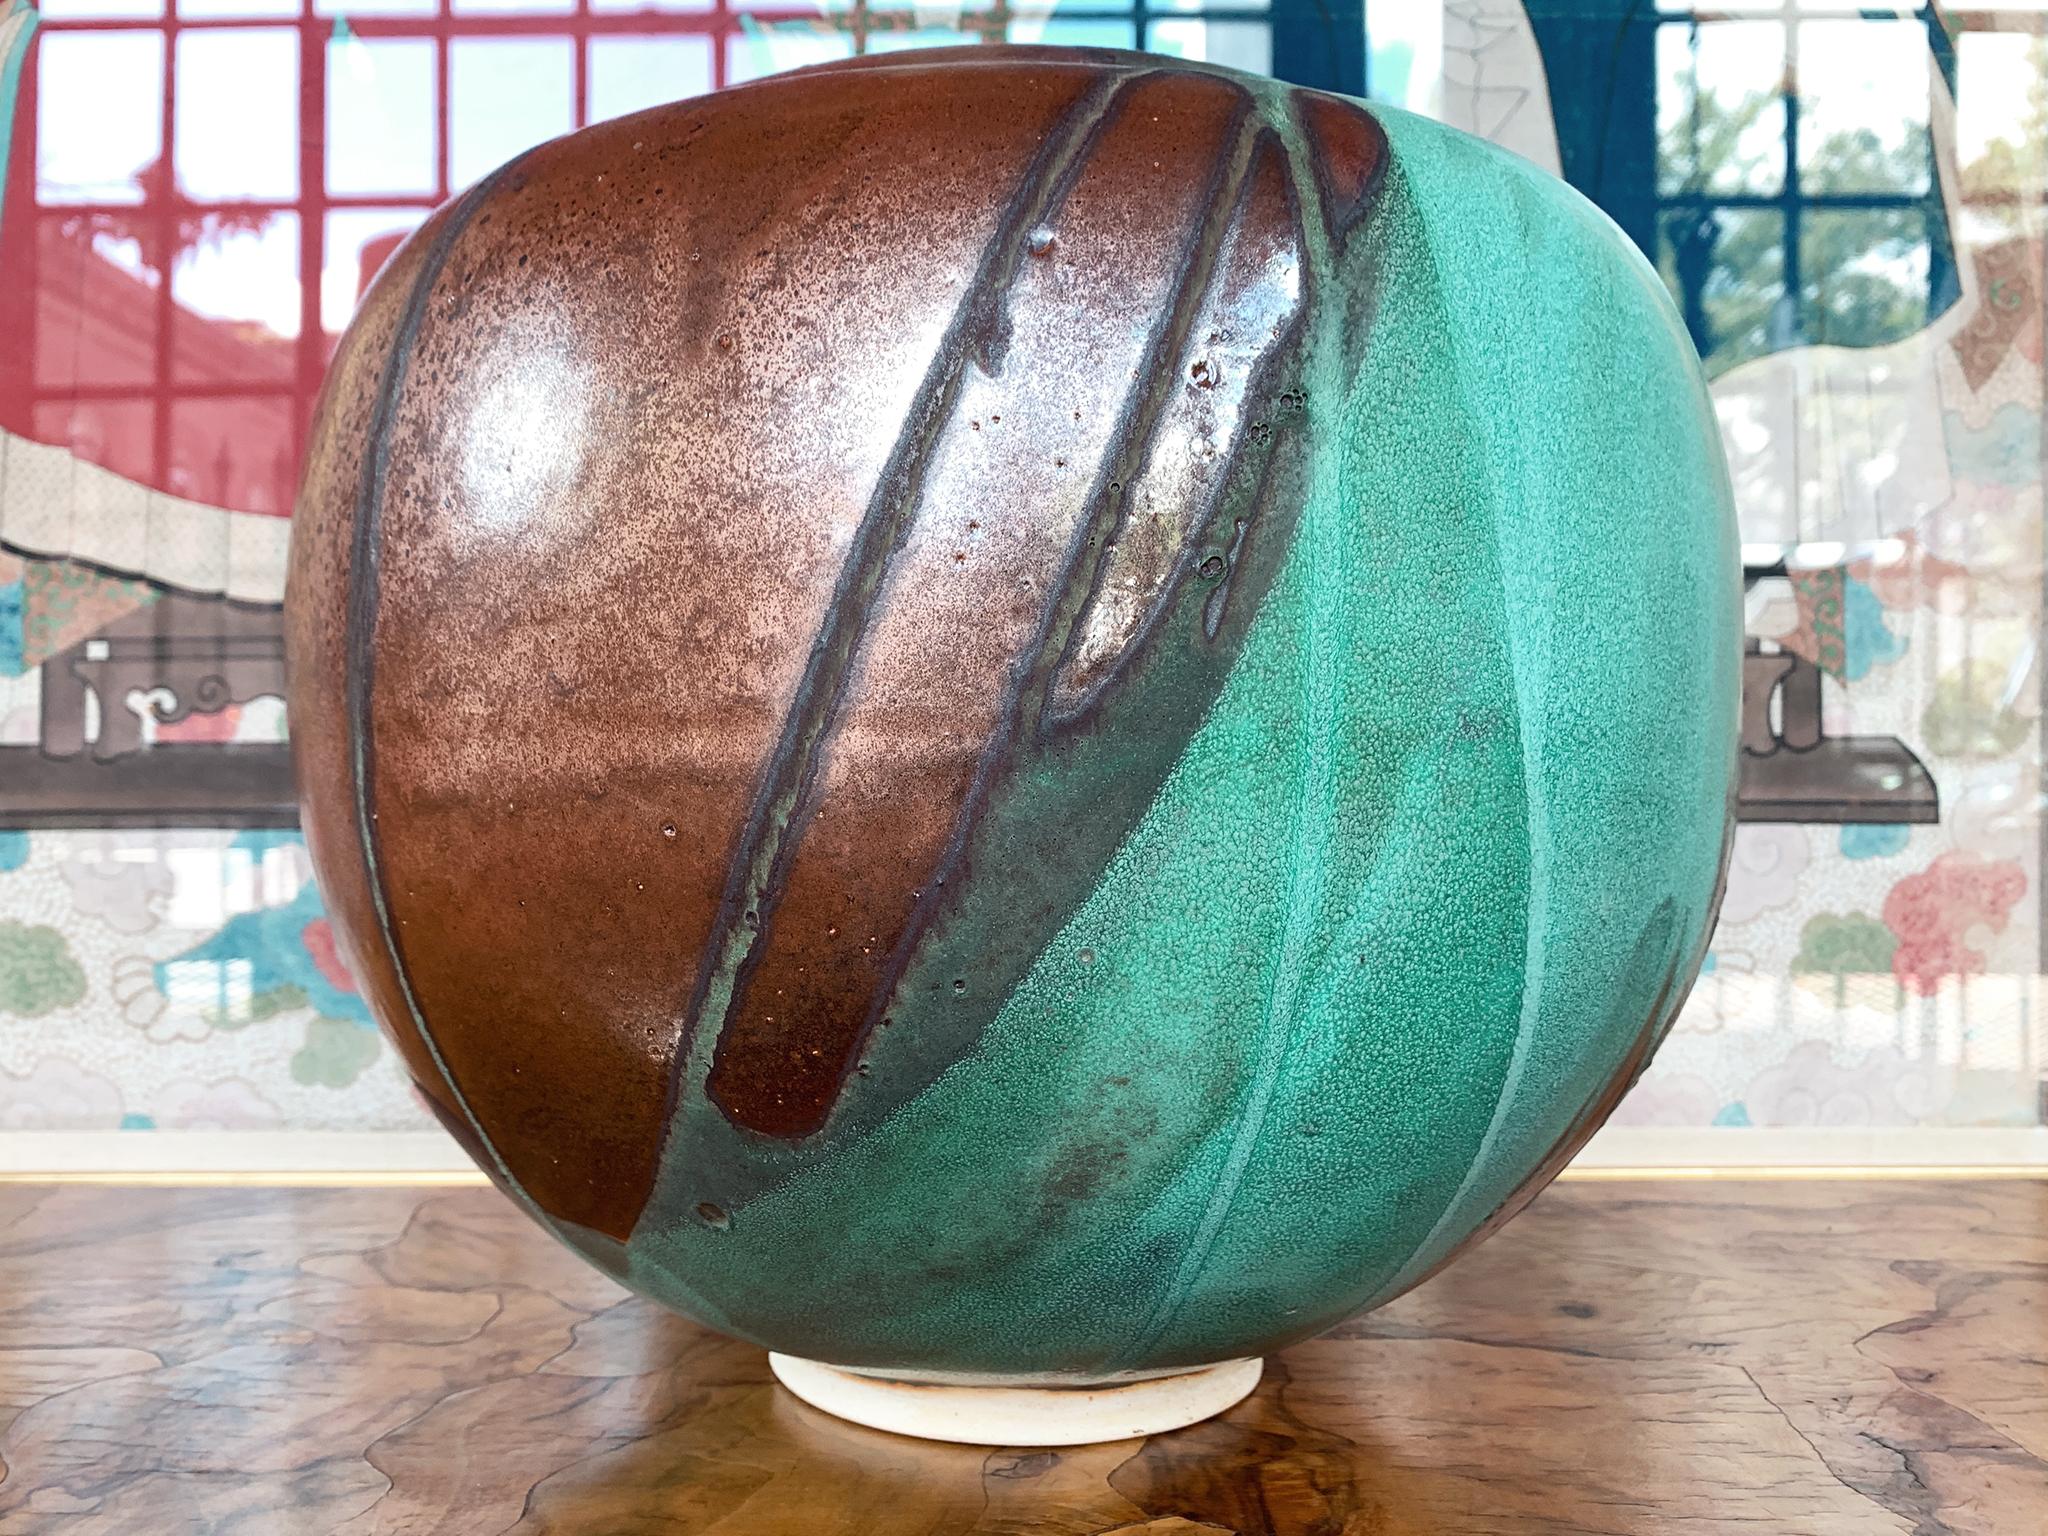 Glazed Thom Lussier Ceramic Vessel #7, from the Oxidized Copper Collection For Sale